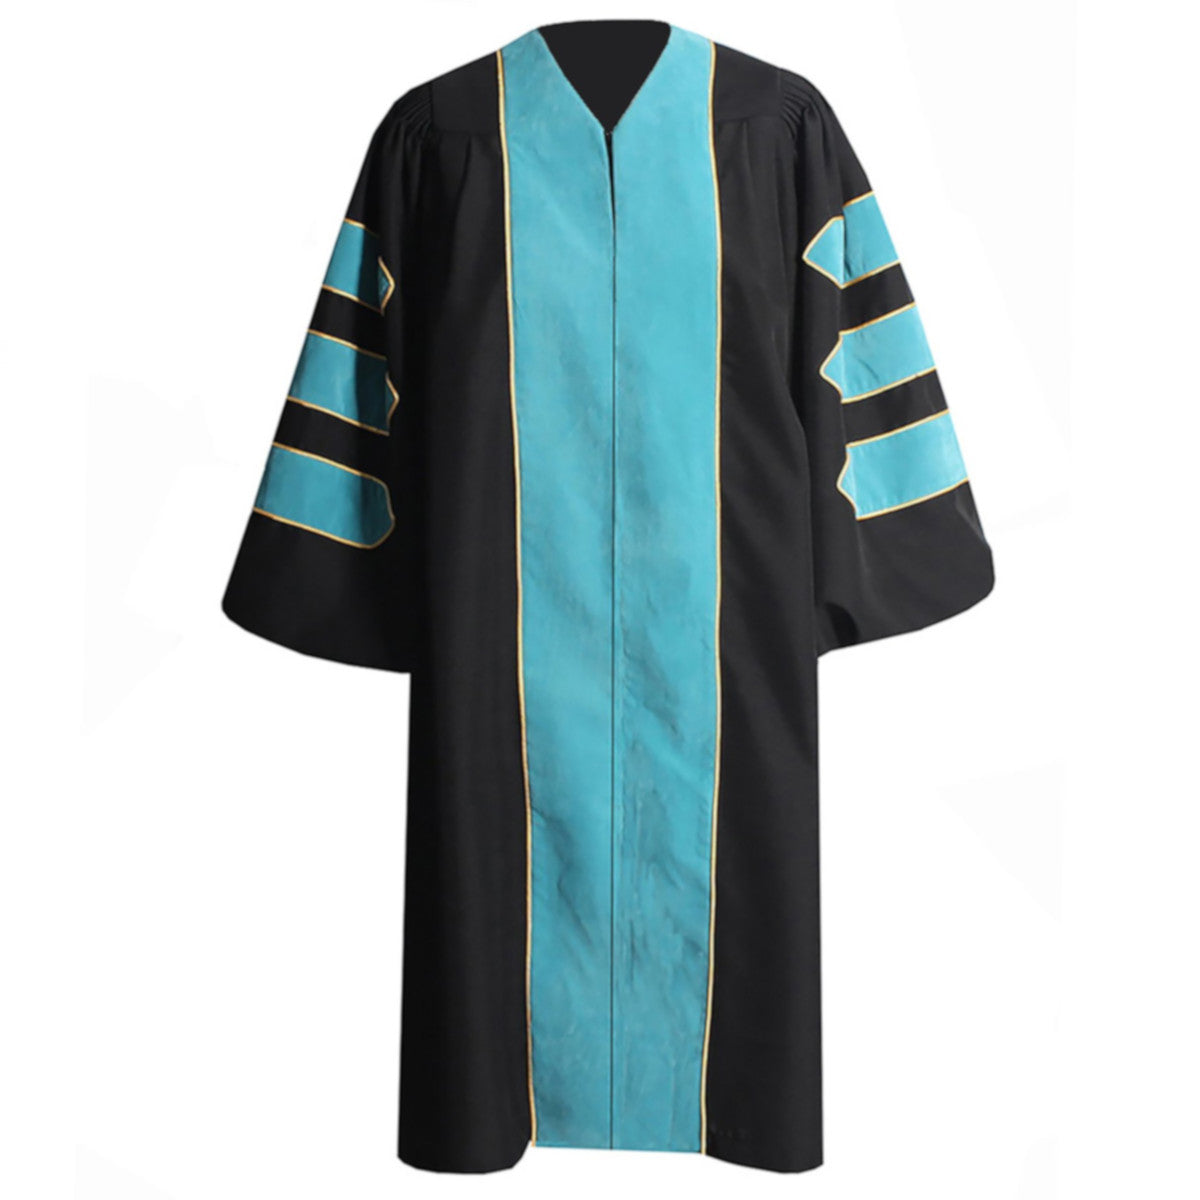 Custom Deluxe Doctoral Gown, 3-Bar